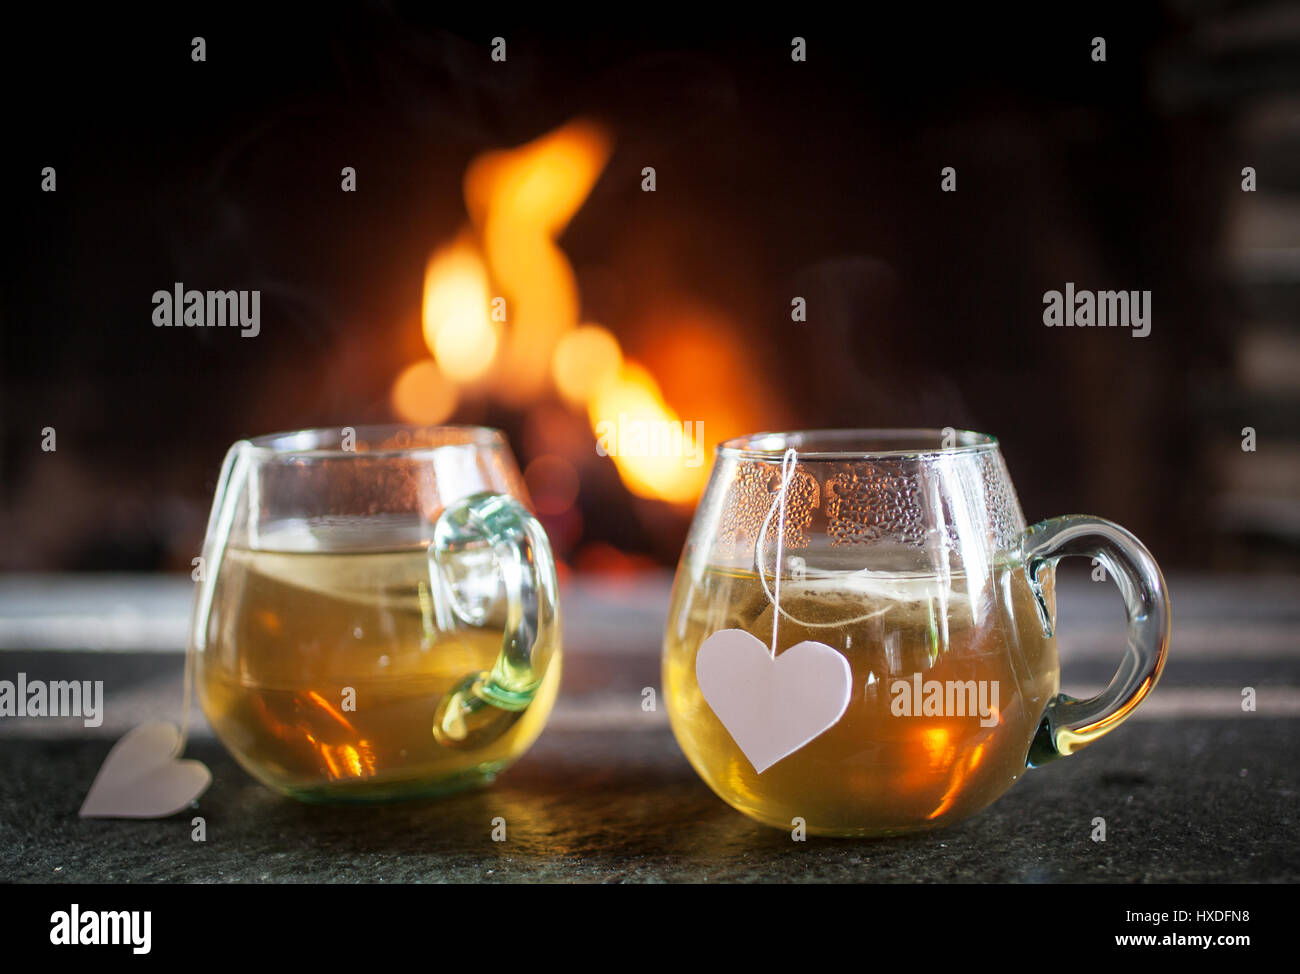 Tea for two by the fireplace Stock Photo